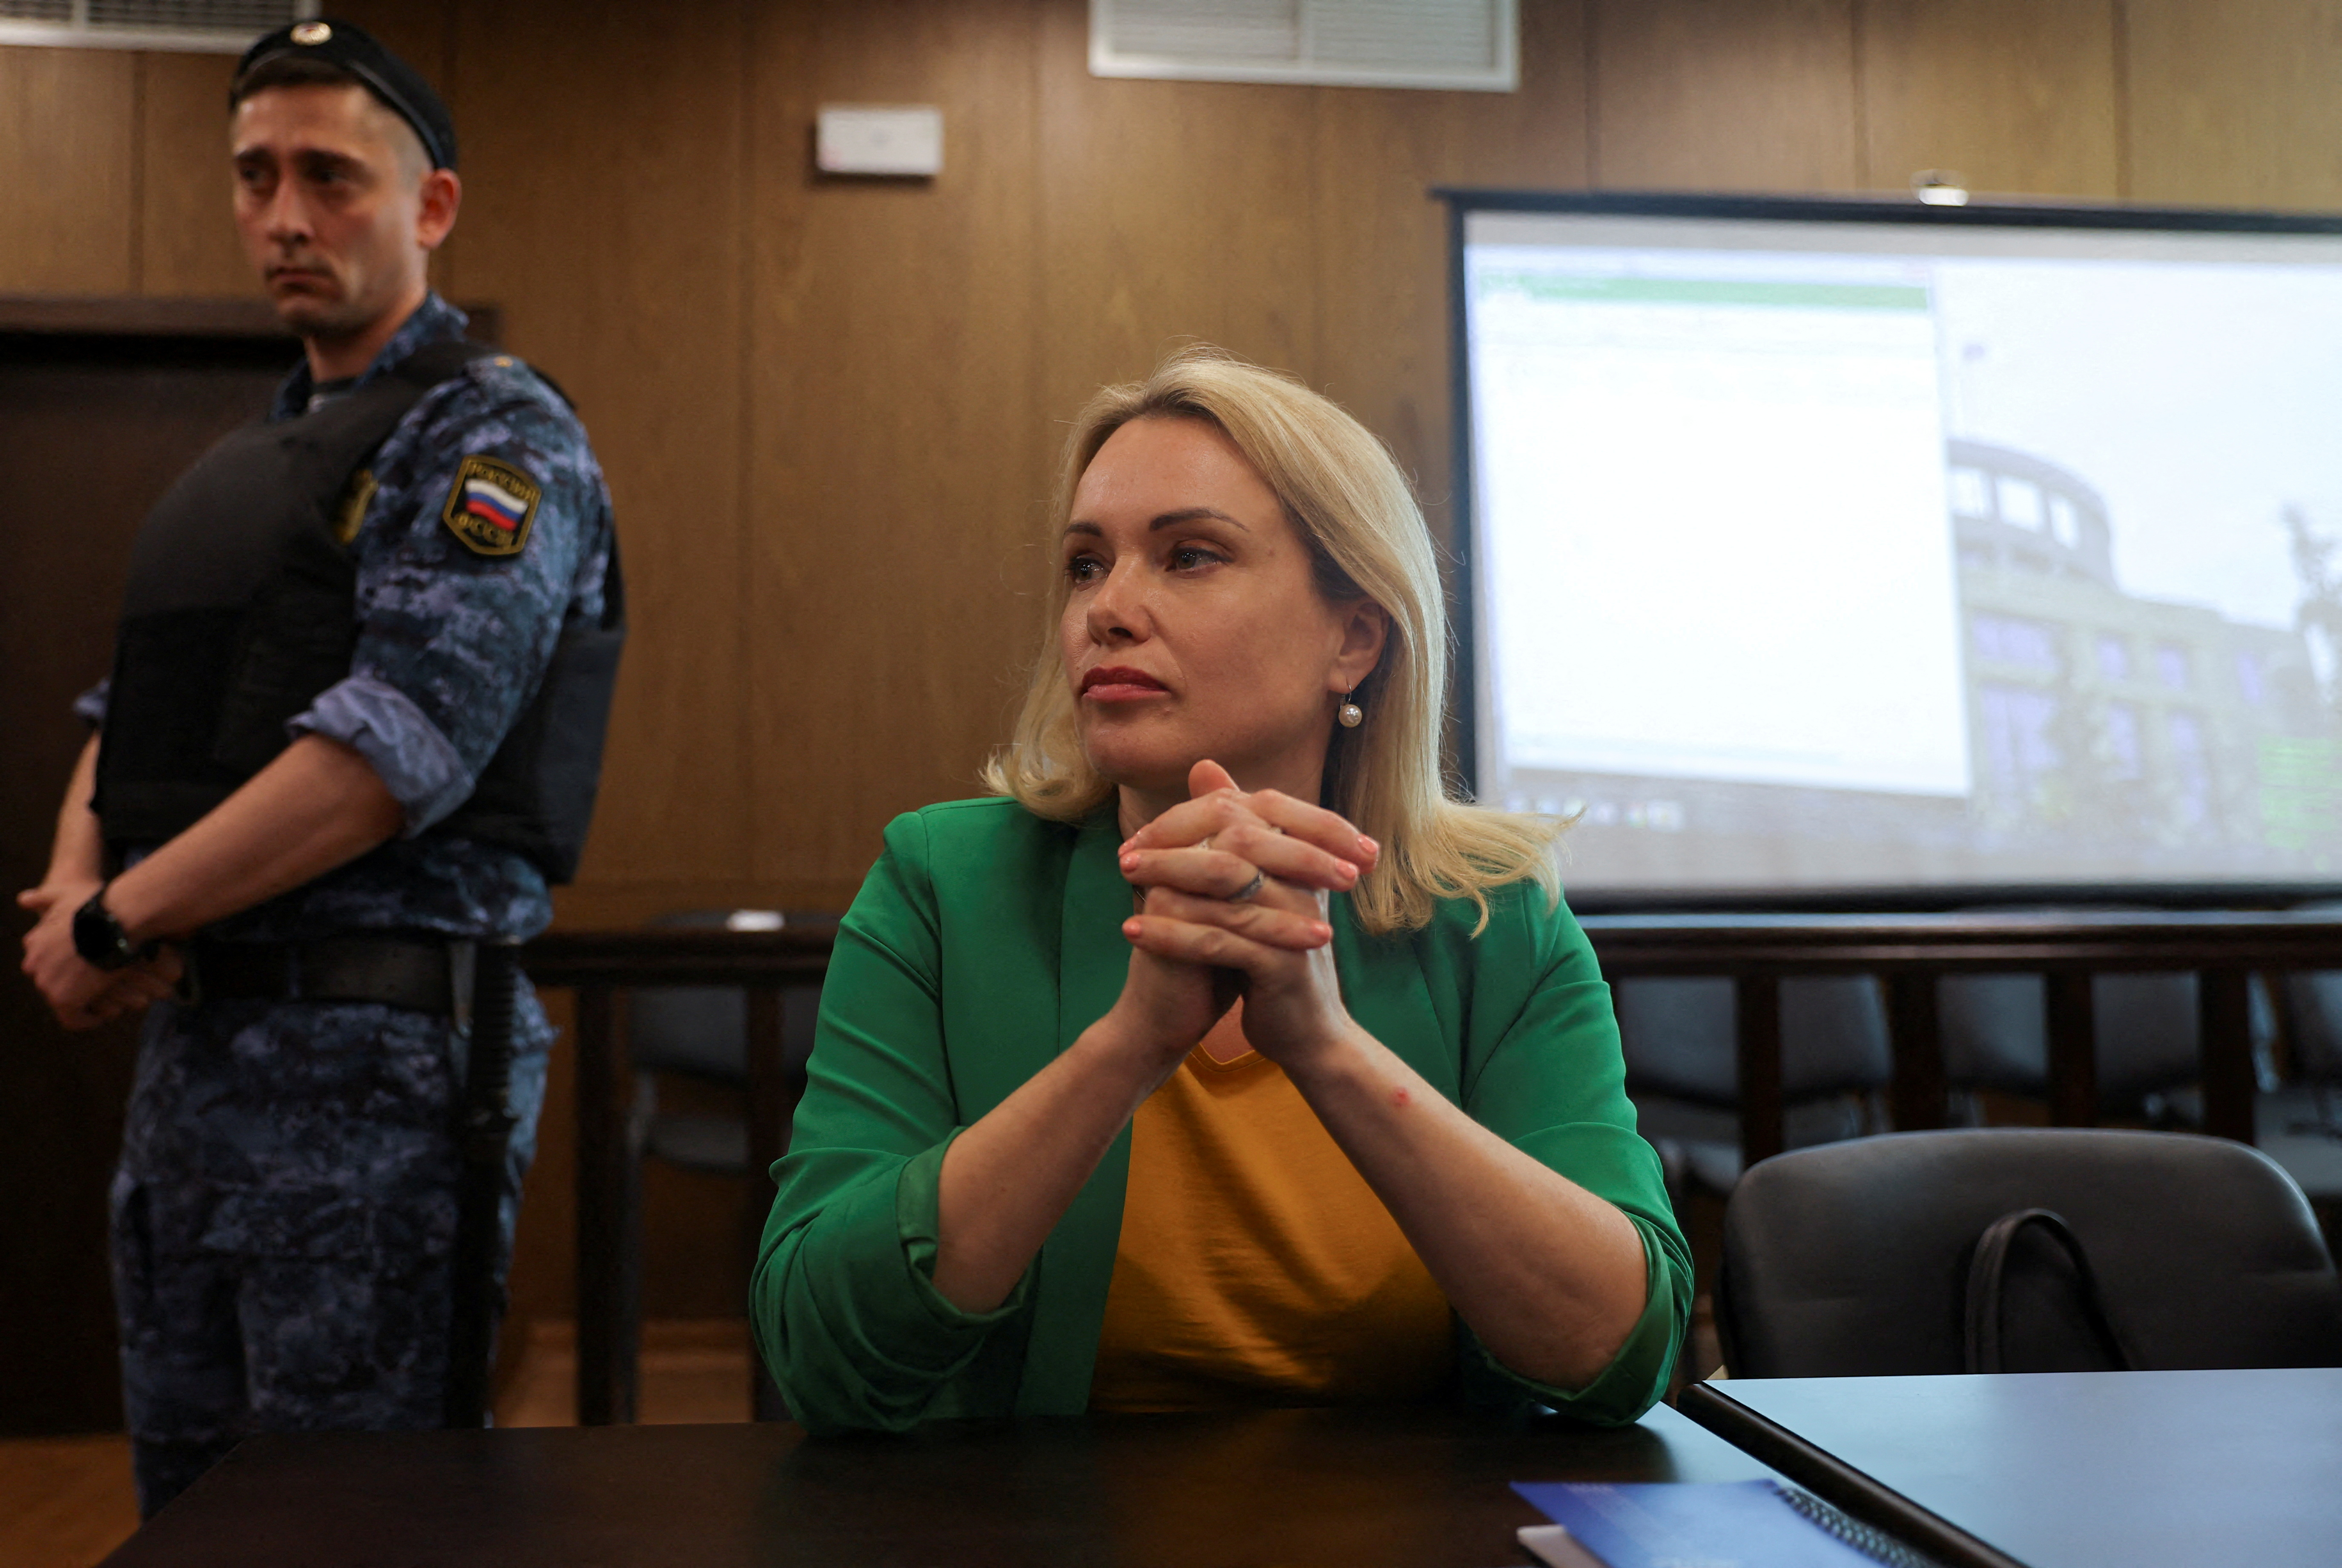 Marina Ovsyannikova worked on state TV until the protest against the invasion caused her to be persecuted (REUTERS / Evgenia Novozhenina / File)